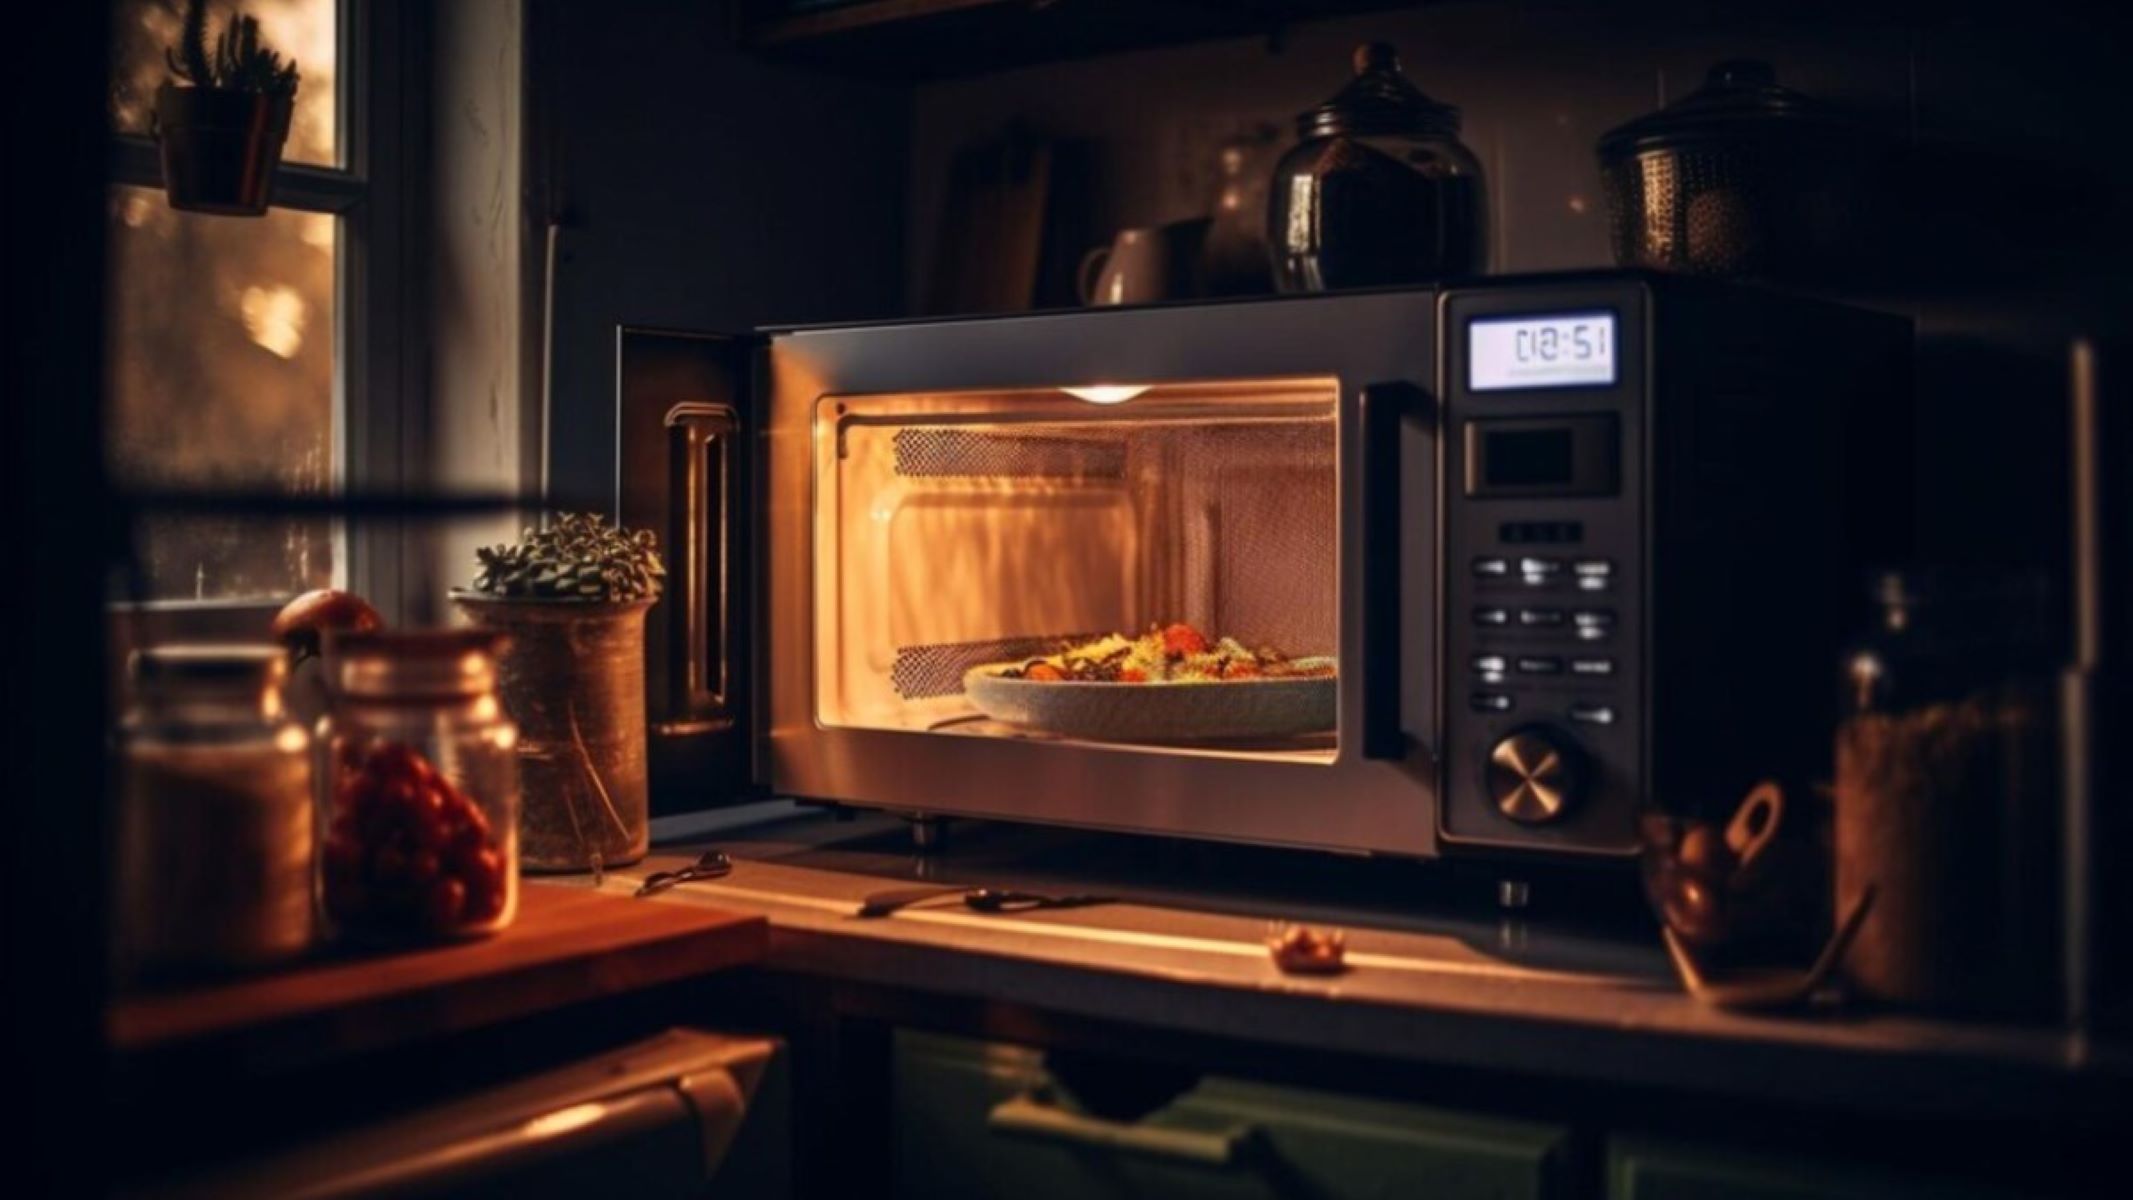 How To Fix The Error Code SE For Samsung Convection Oven